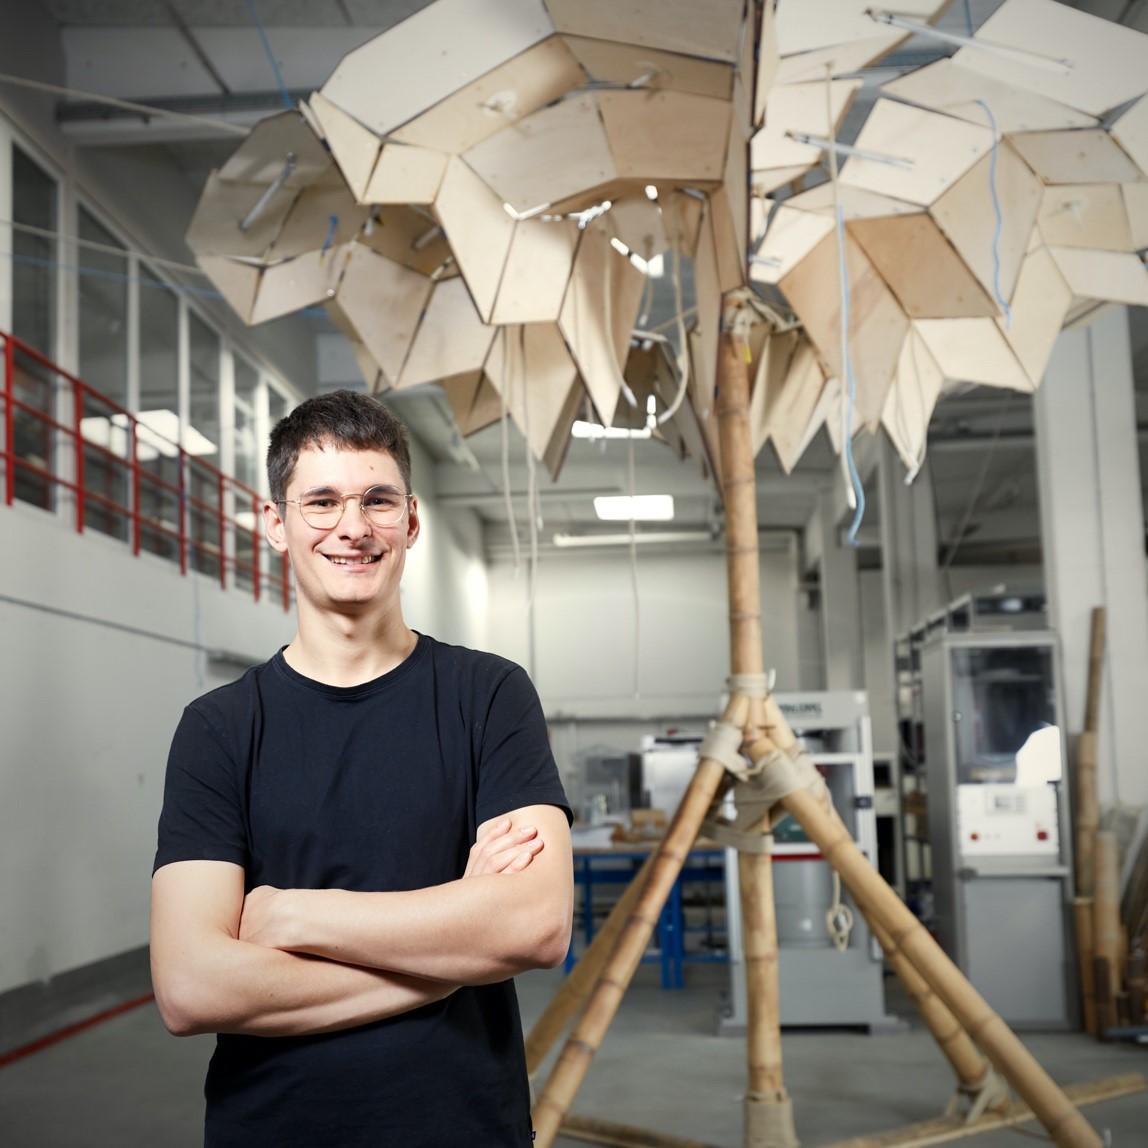 Master of Science in civil and architectural Engineering Leo Heinzl won the second placement in IASS 2021 competition for his innovative pavilion. In the photo he shows his prototype in Aarhus University’s Deep Tech Experimental Hub.  (Photo: Marjun Danielsen)